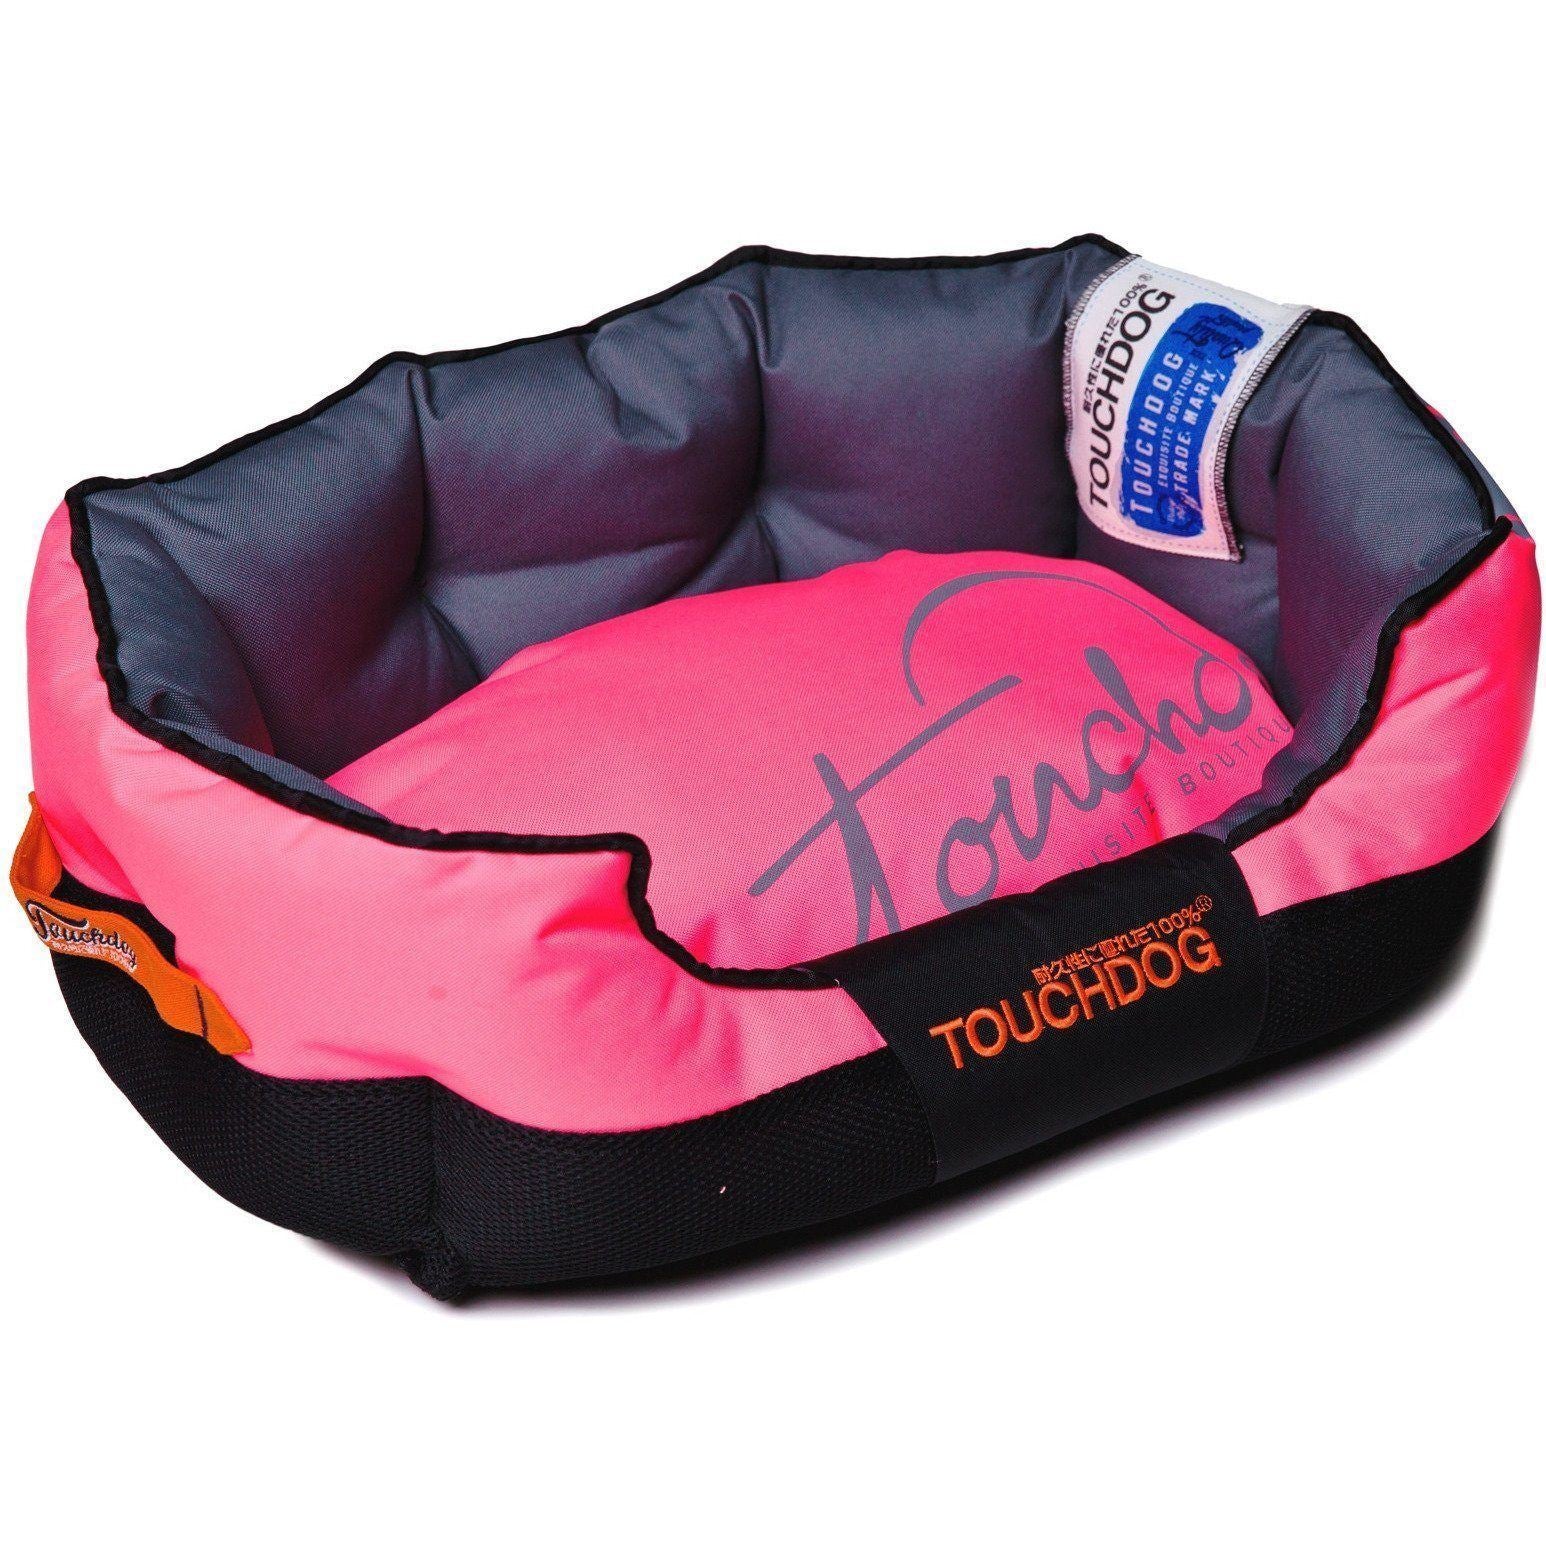 Touchdog ® 'Performance-Max' Sporty Reflective Water-Resistant Dog Bed Medium Pink, Black